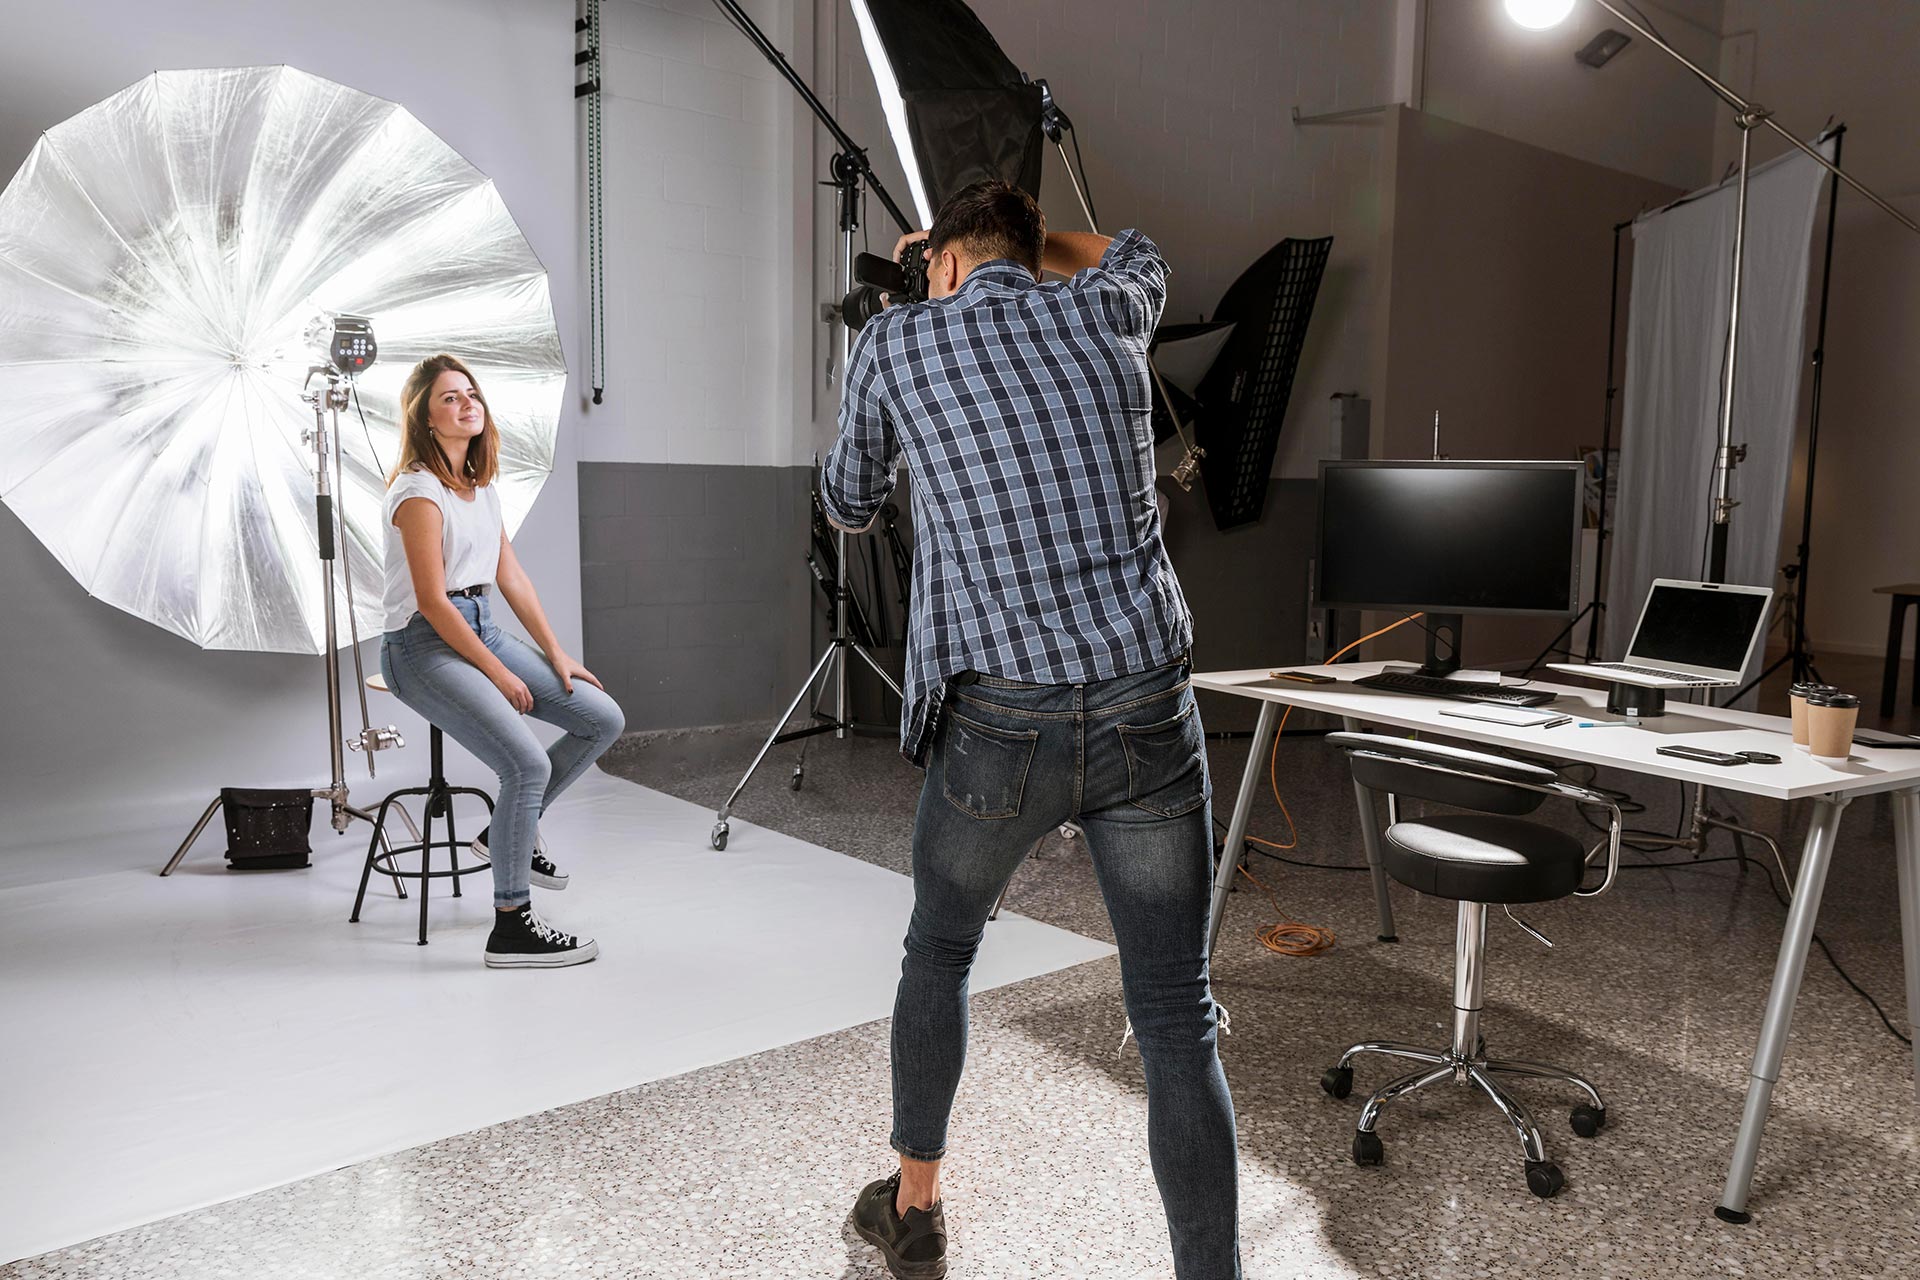 Photographer clicking photographs of his model in a studio.